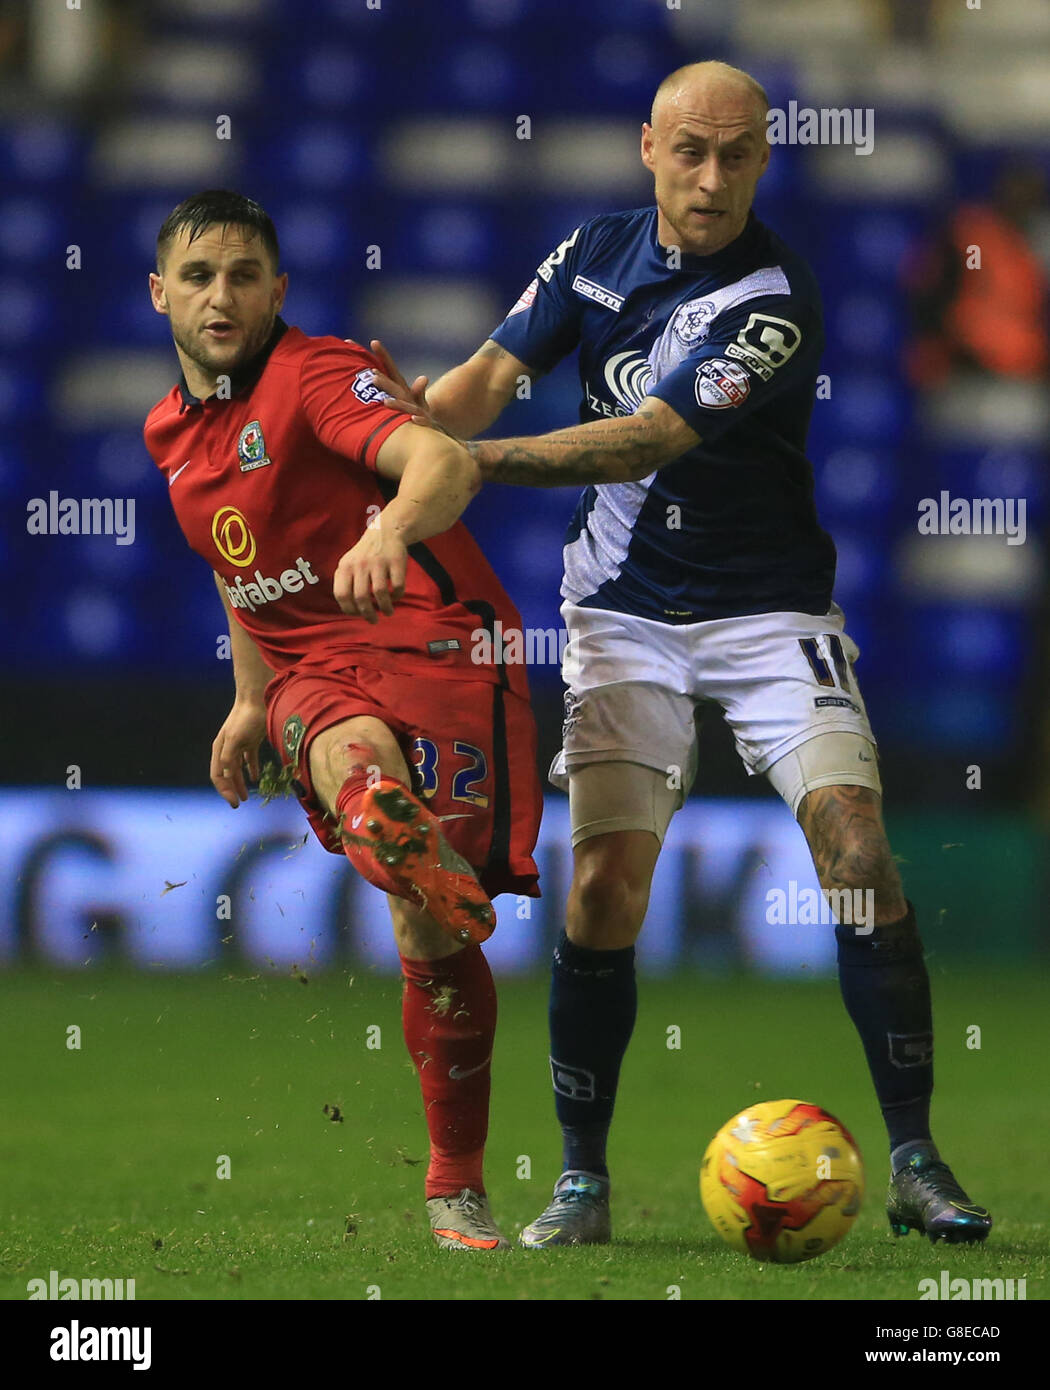 Blackburn Rovers' Craig Conway (left) battles for the ball with Birmingham City's David Cotterill during the Sky Bet Championship match at St Andrews, Birmingham. PRESS ASSOCIATION Photo. Picture date: Tuesday November 3, 2015. See PA story SOCCER Birmingham. Photo credit should read: Nick Potts/PA Wire. Online in-match use limited to 75 images, no video emulation. No use in betting, games or single club/league/player Stock Photo